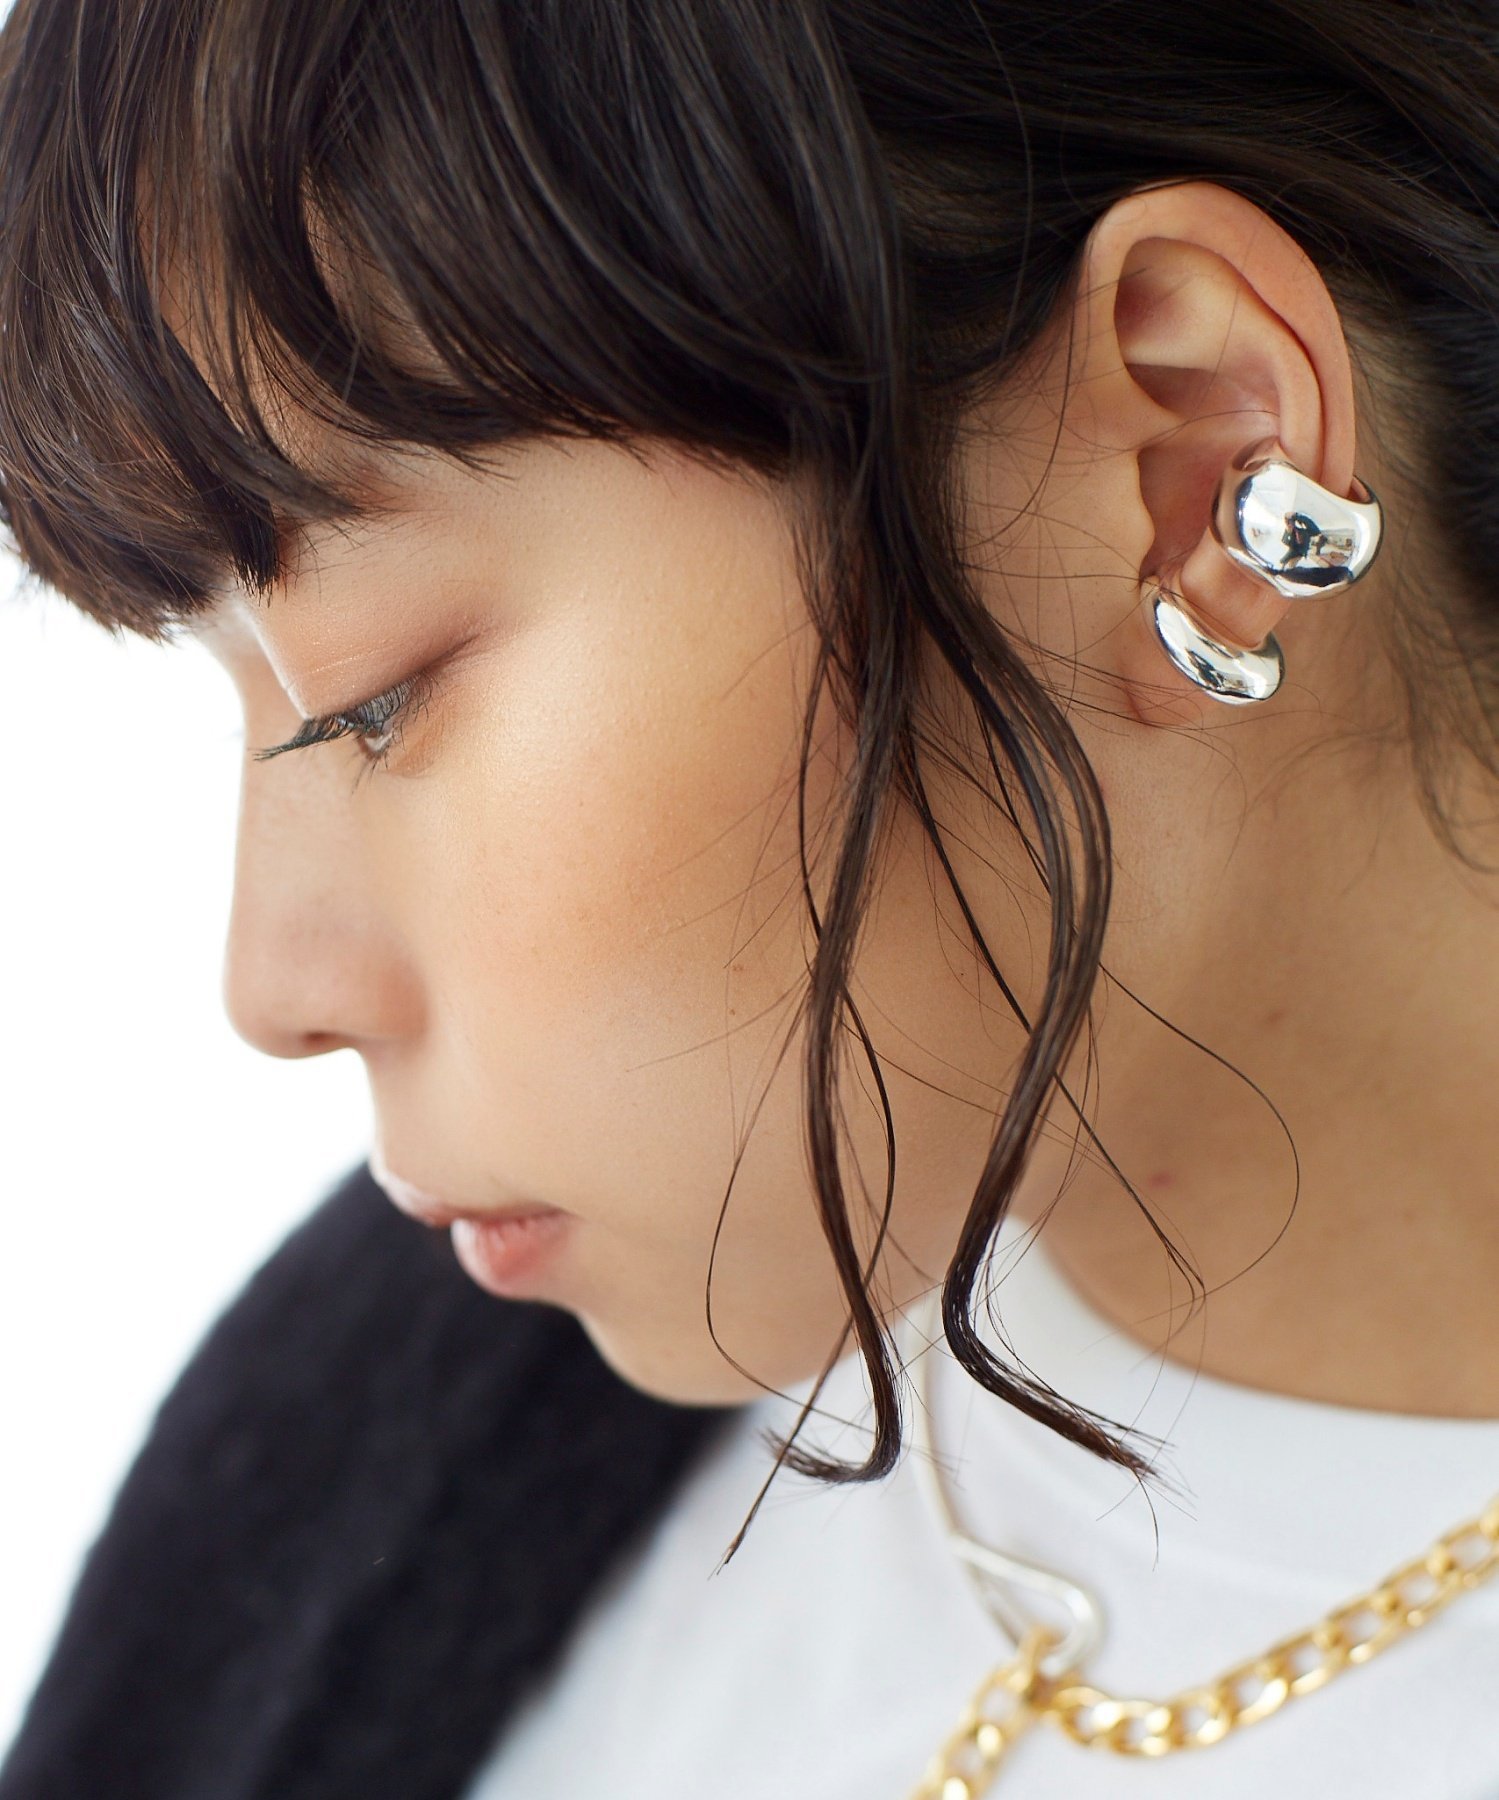 【SALE／10%OFF】Nothing And Others NothingAndOthers/Thick&Thin Earc ナッシングアンドアザーズ アクセサリー・腕時計 イヤリング・イヤーカフ シルバー【送料無料】